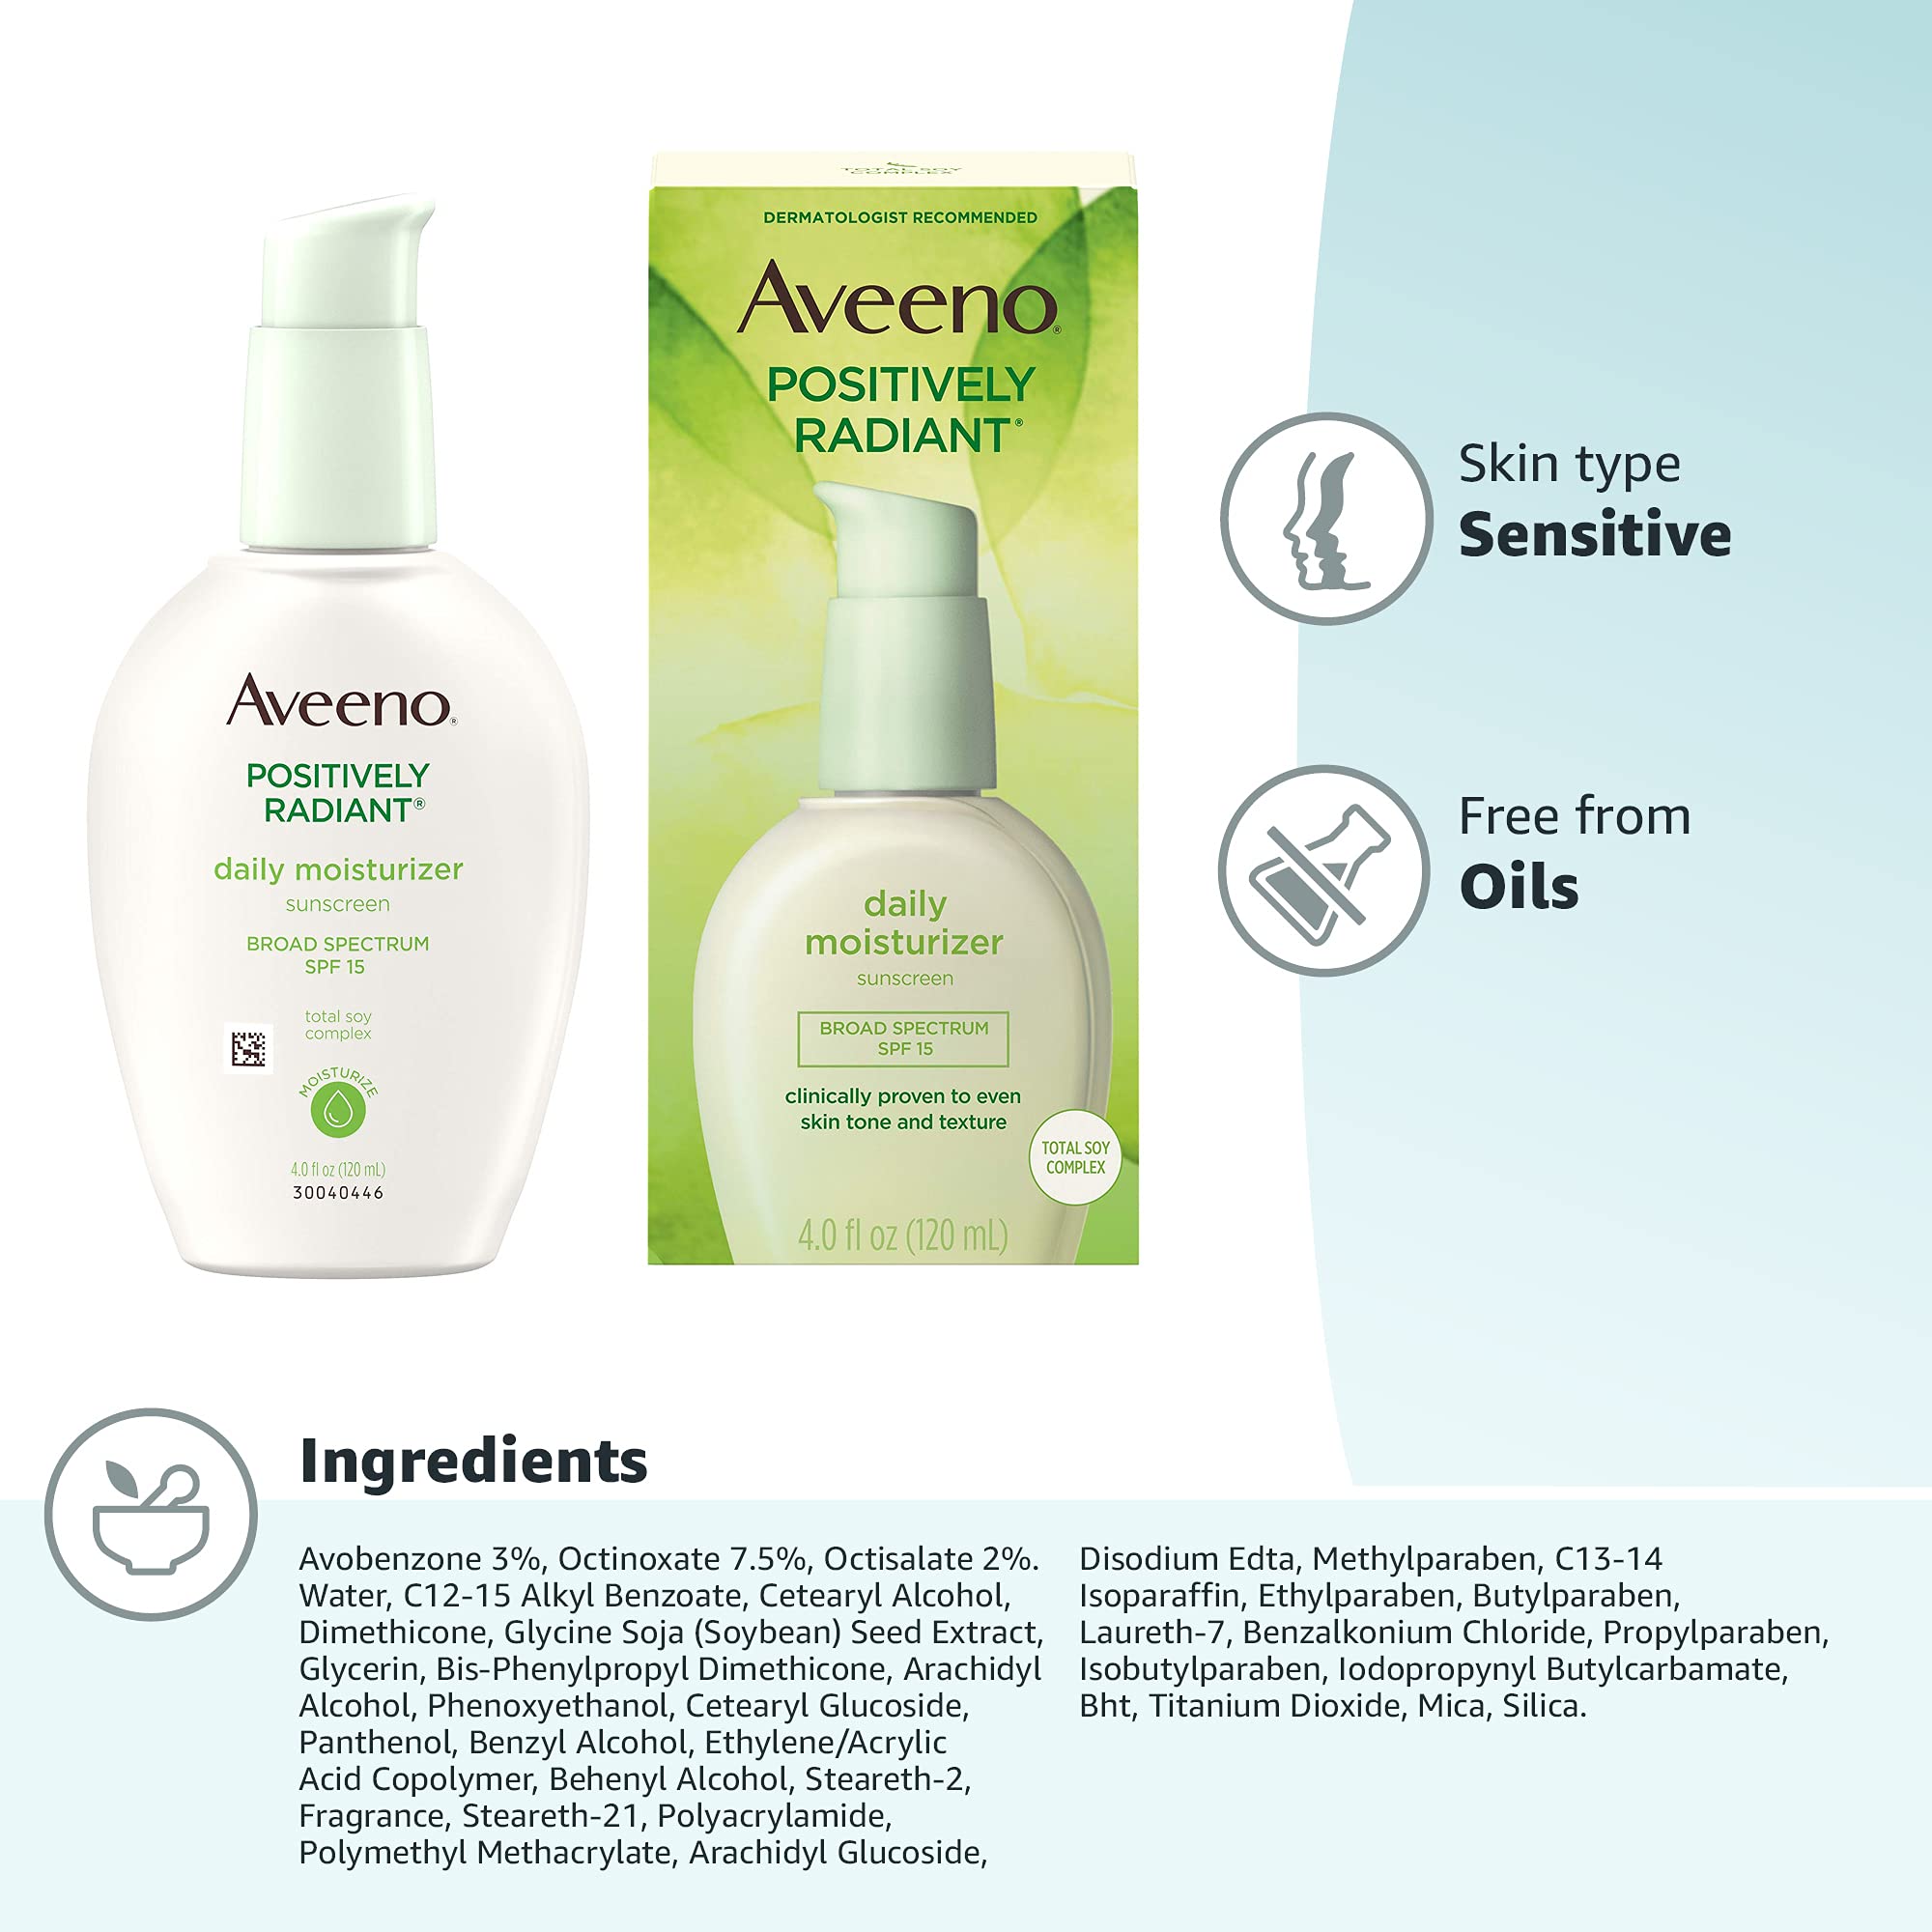 Aveeno Positively Radiant Daily Facial Moisturizer with Broad Spectrum SPF 15 Sunscreen & Total Soy Complex for Even Tone & Texture, Hypoallergenic, Oil-Free & Non-Comedogenic, 4 fl. oz